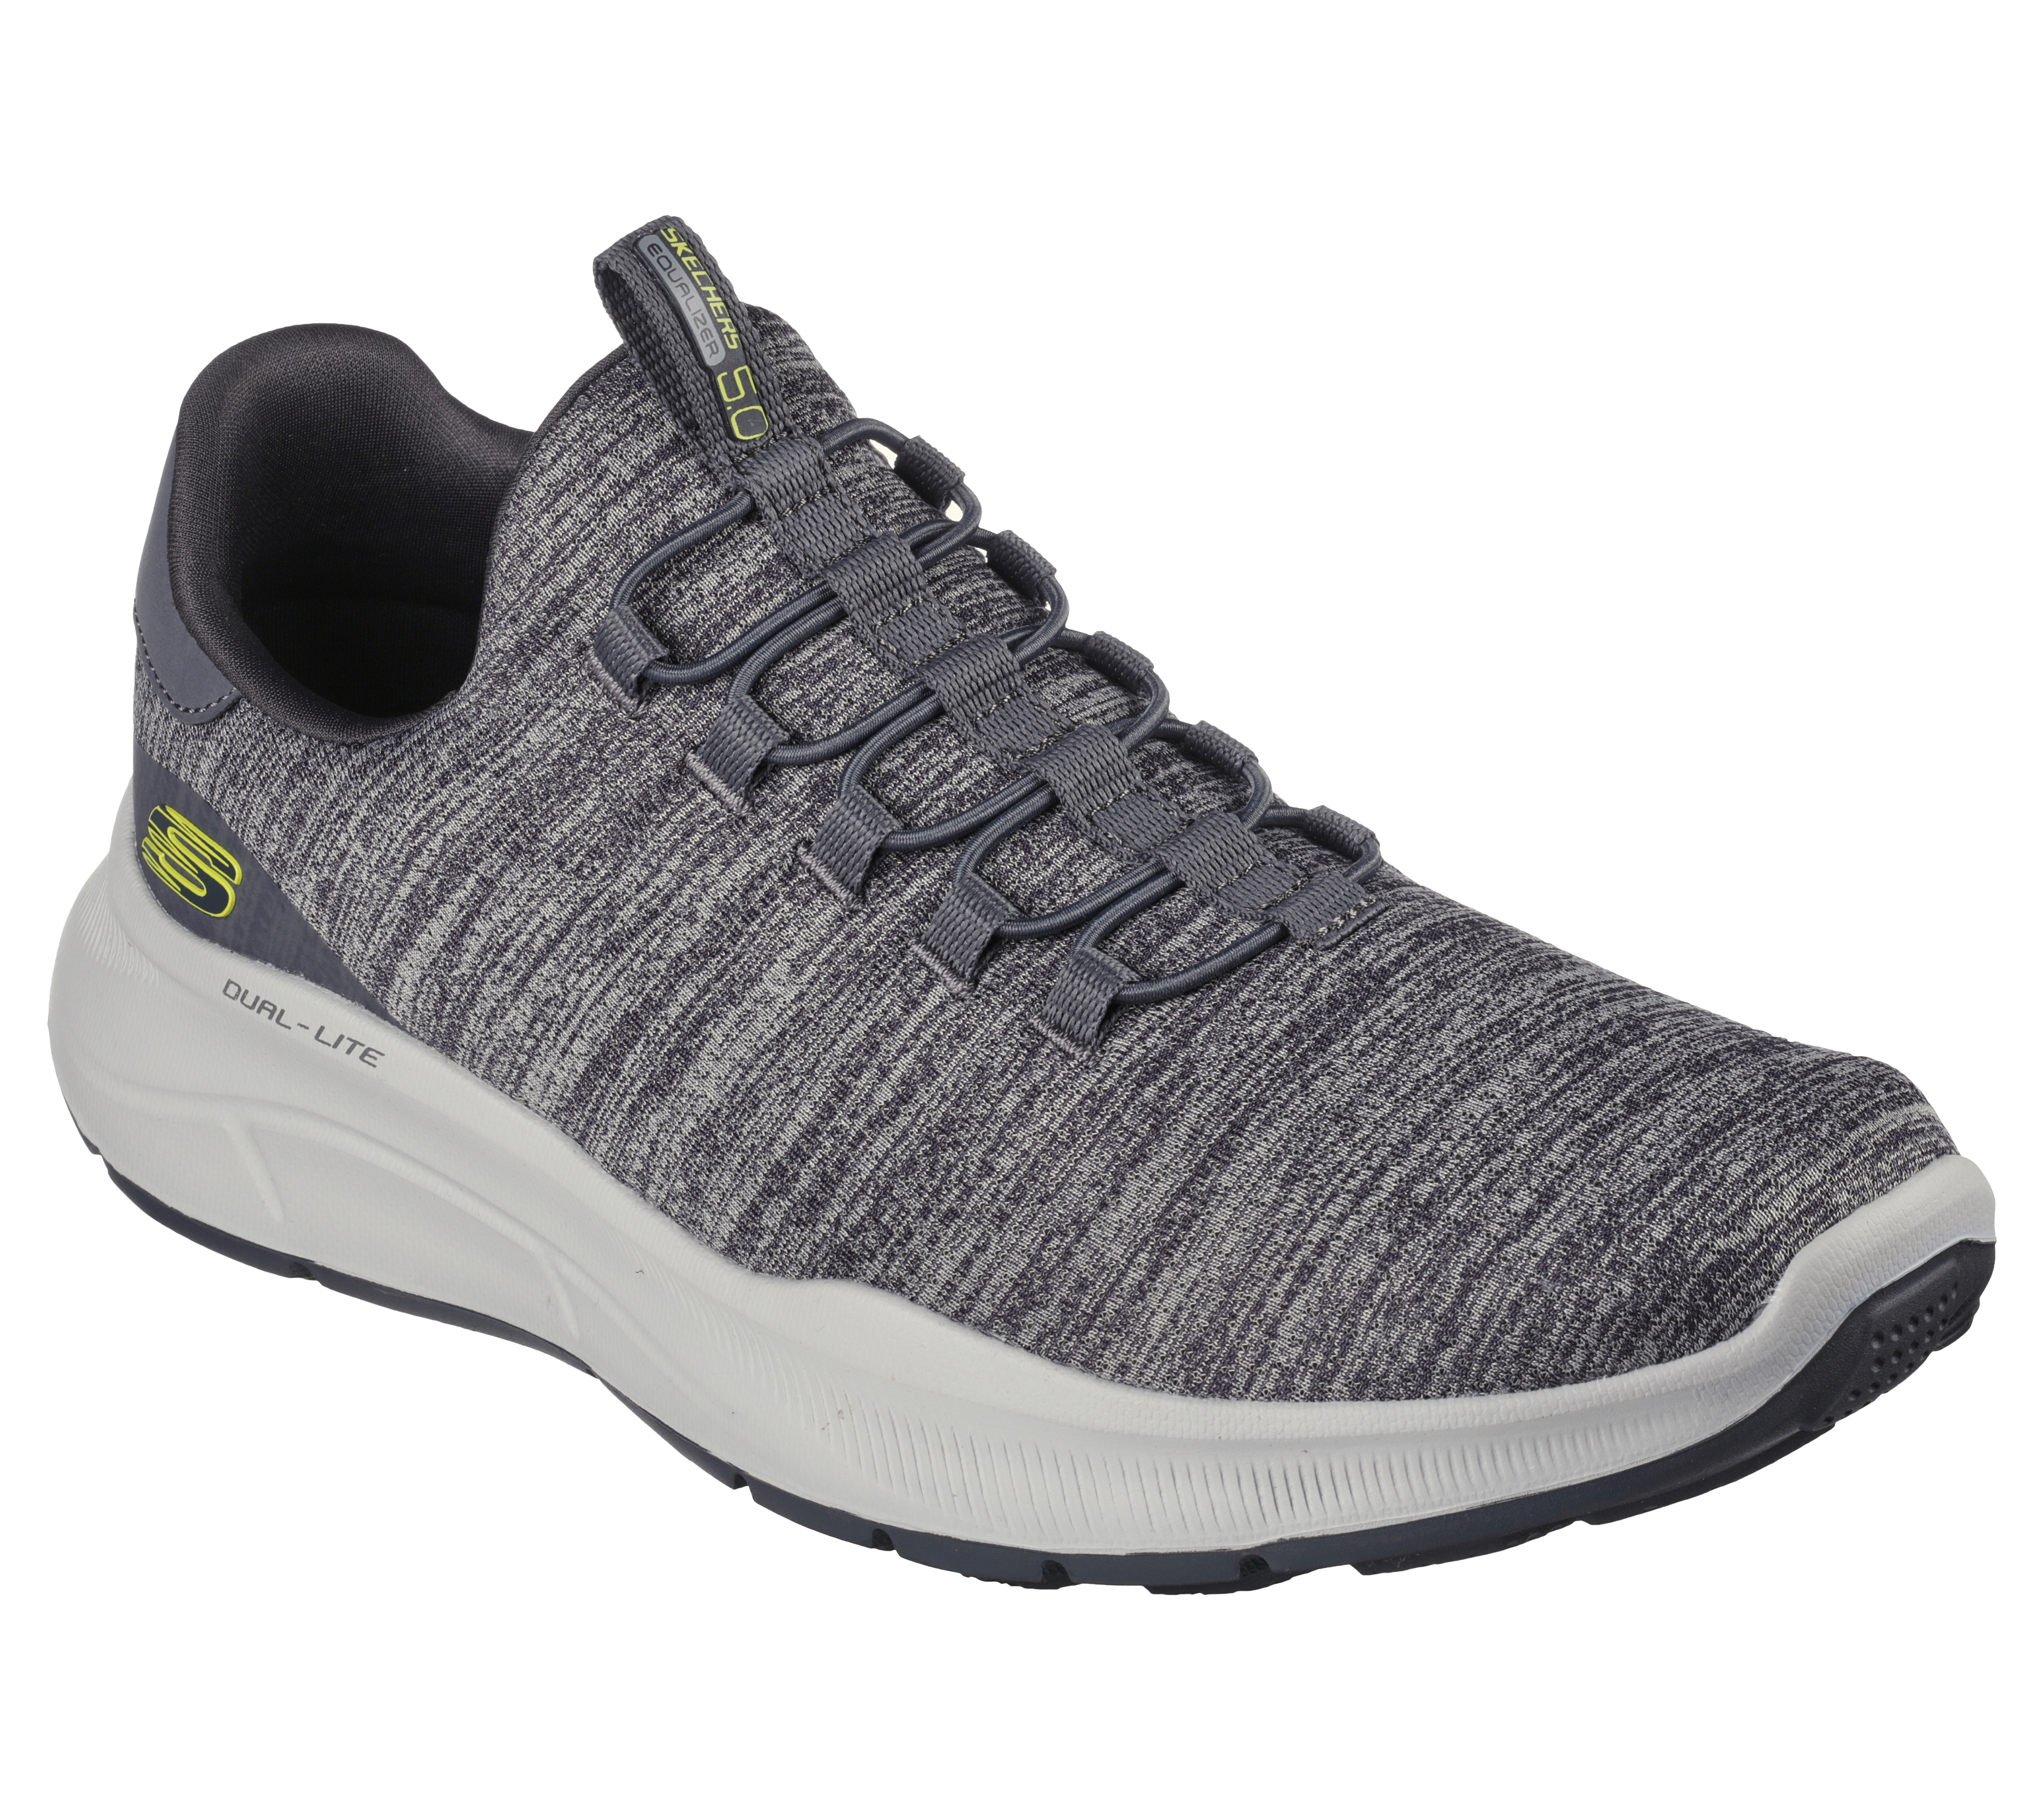 Equalizer | Lemba Fit: - Relaxed 5.0 SKECHERS